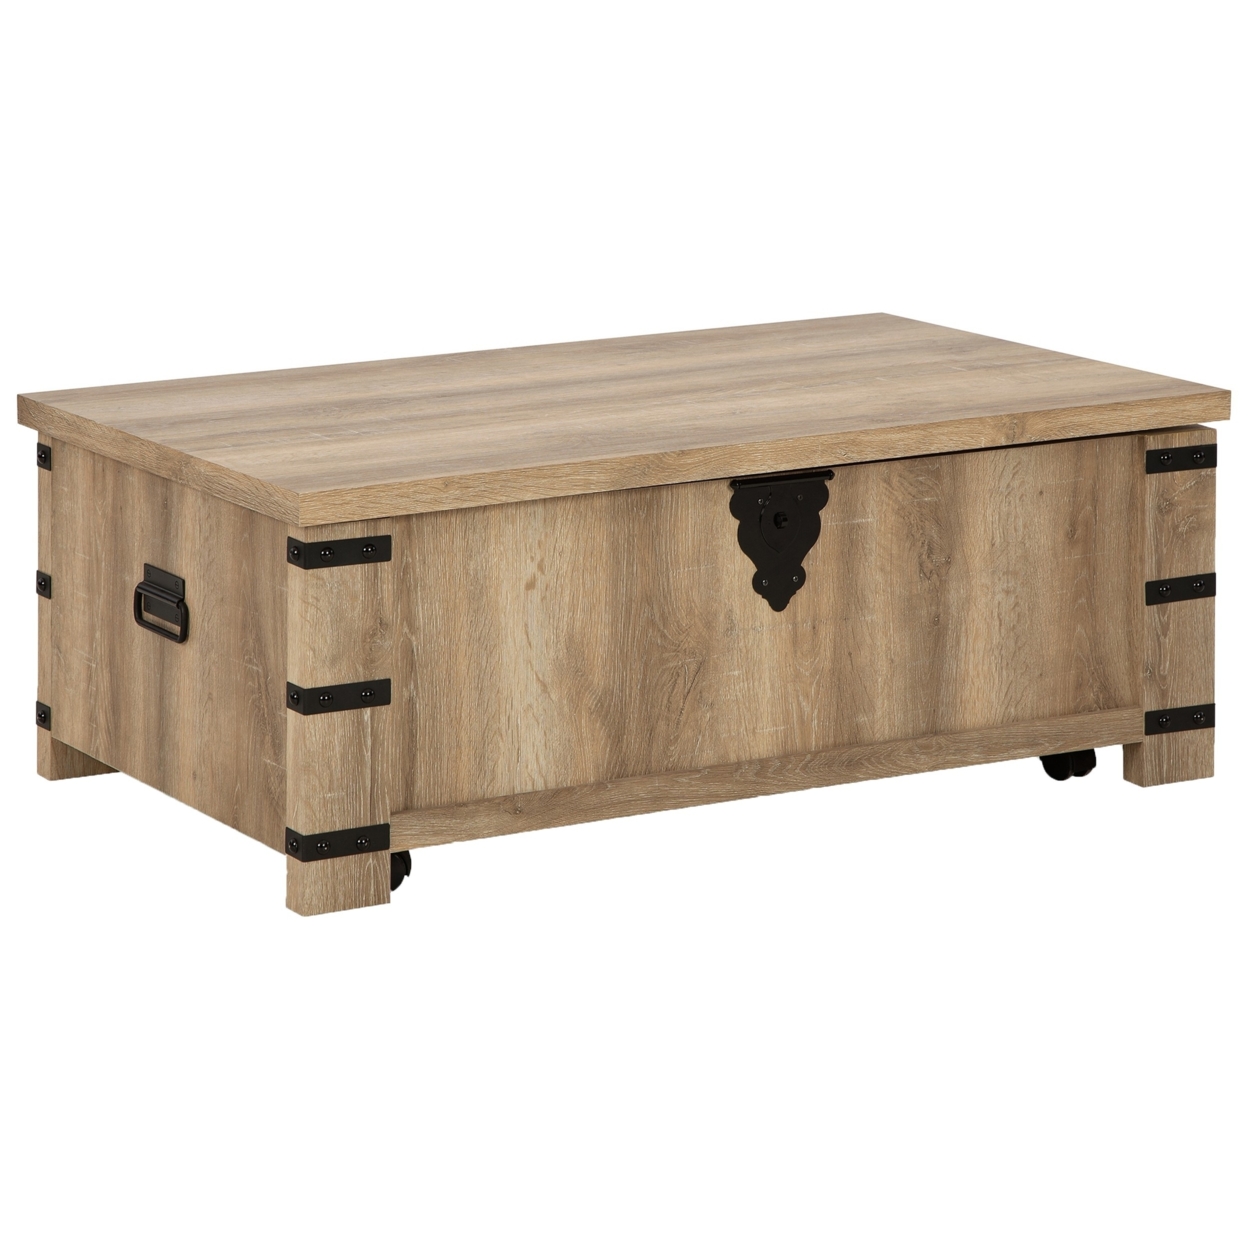 Classic 47 Inch Coffee Table, Lift Top, Concealed Storage, Light Brown Wood- Saltoro Sherpi